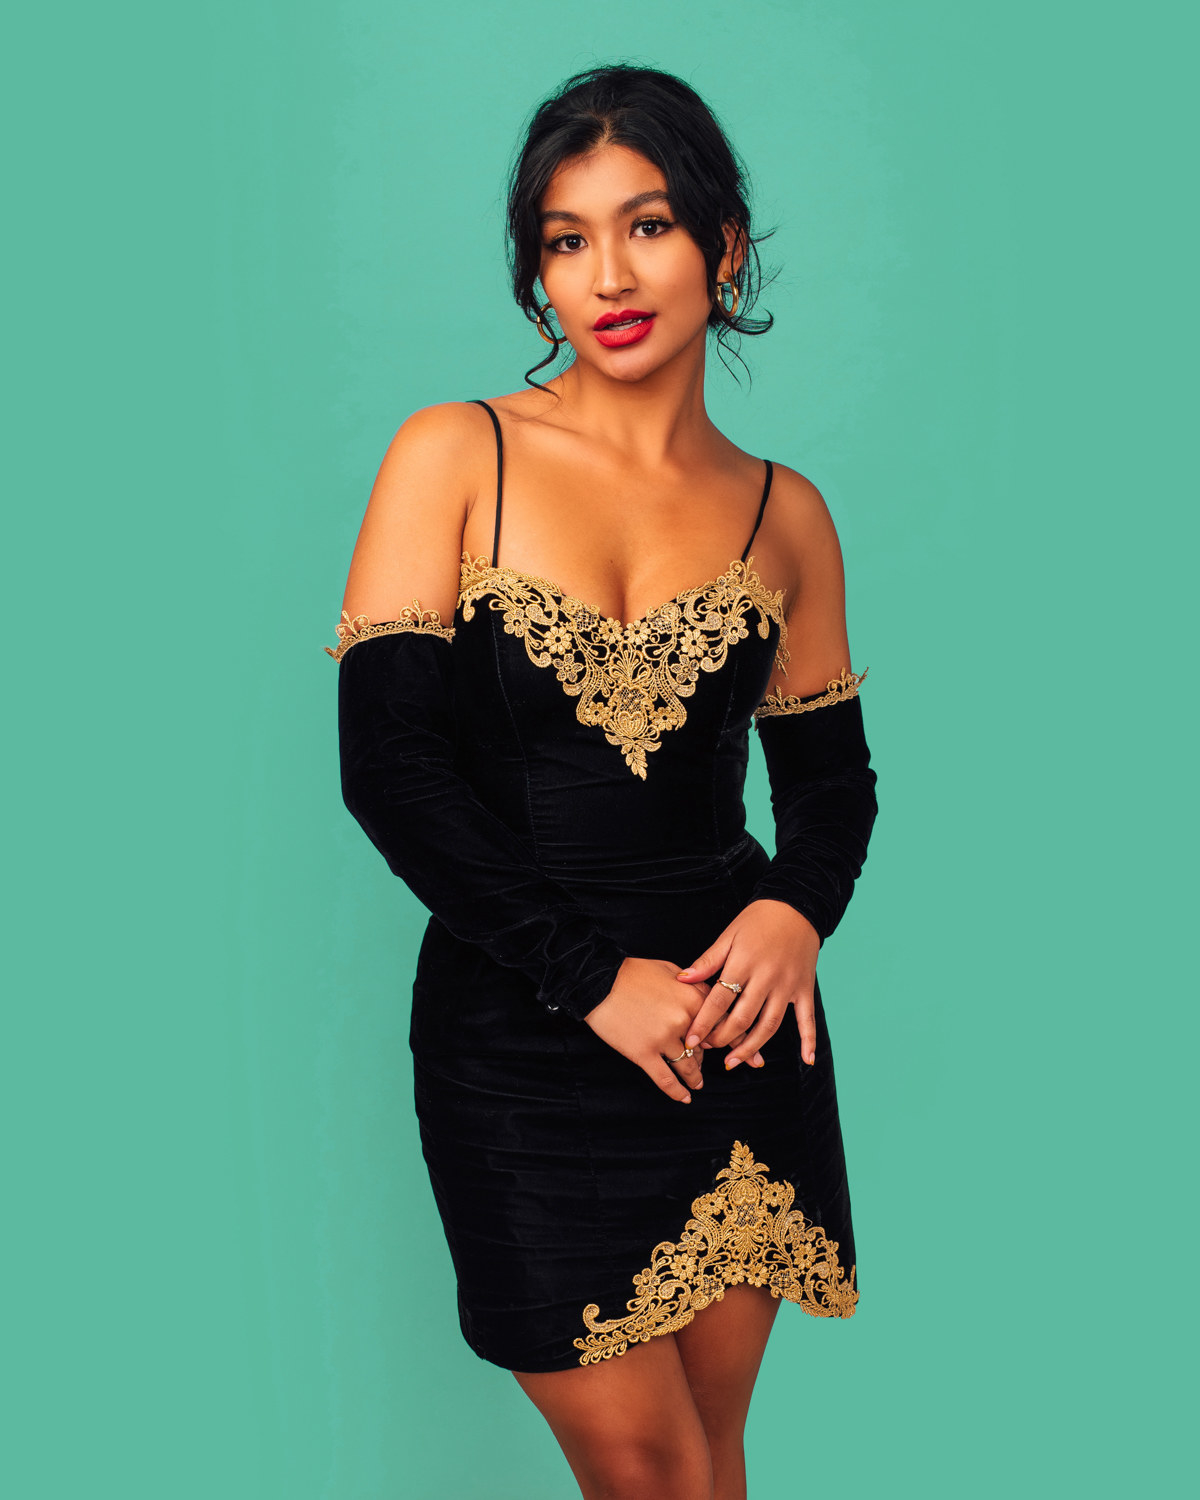 Deja  has their hands clasped as they pose in a short lace and velvet dress